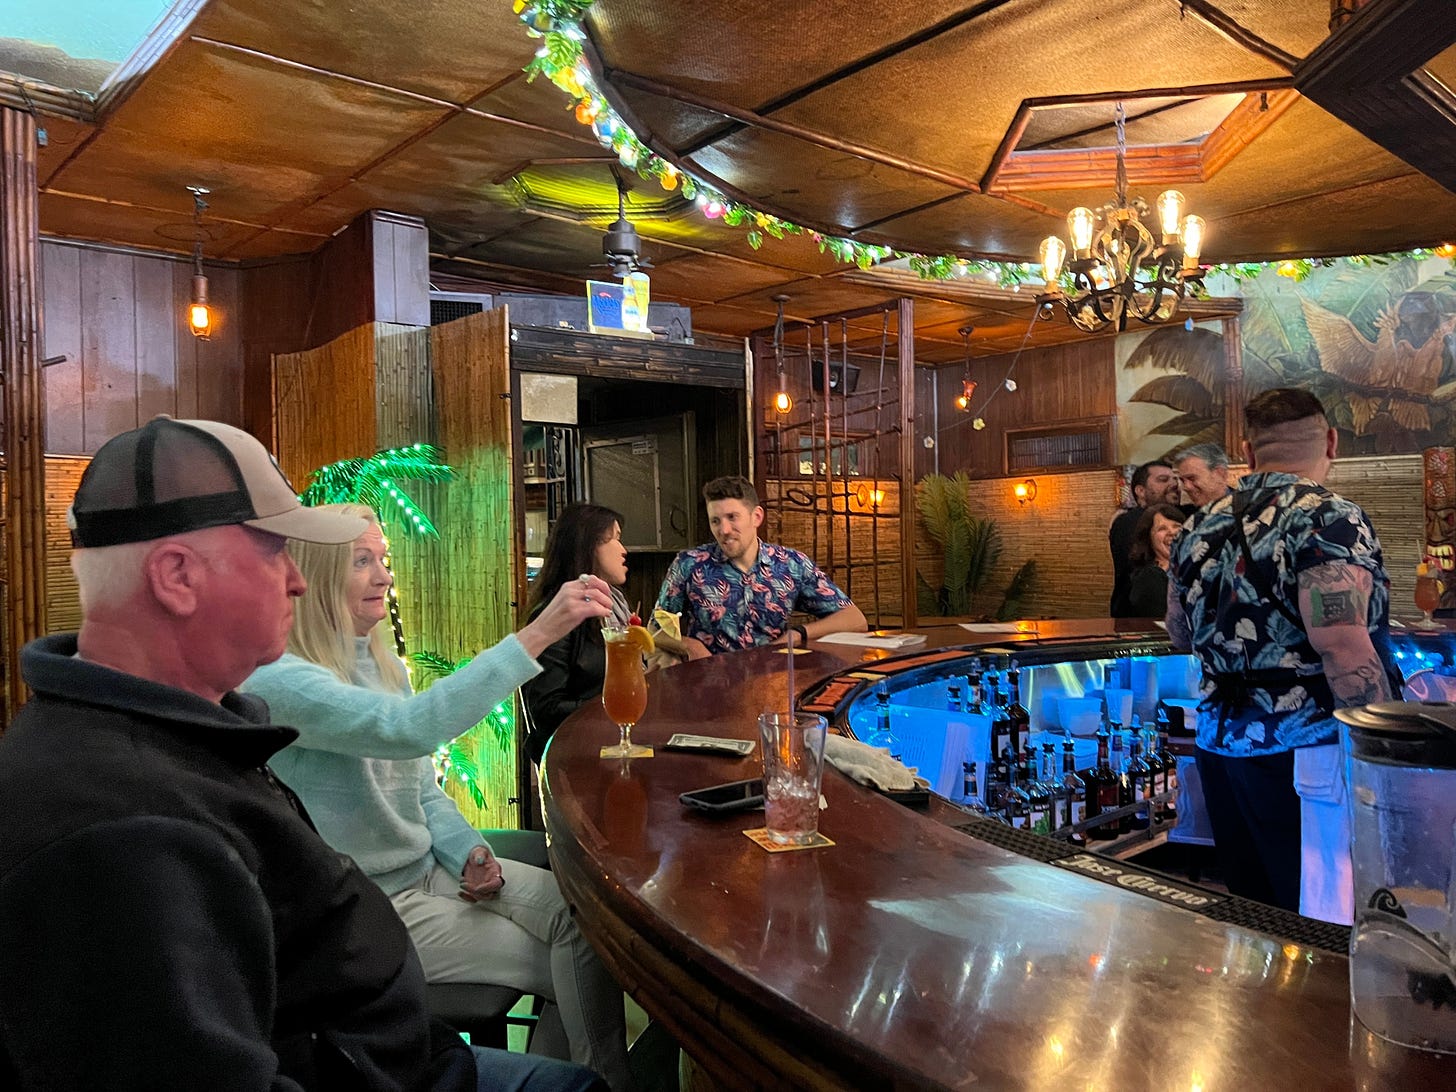 Four customer sit at a circular bar drinking cocktails and a bartender stands behind the bar in a tropical shirt.